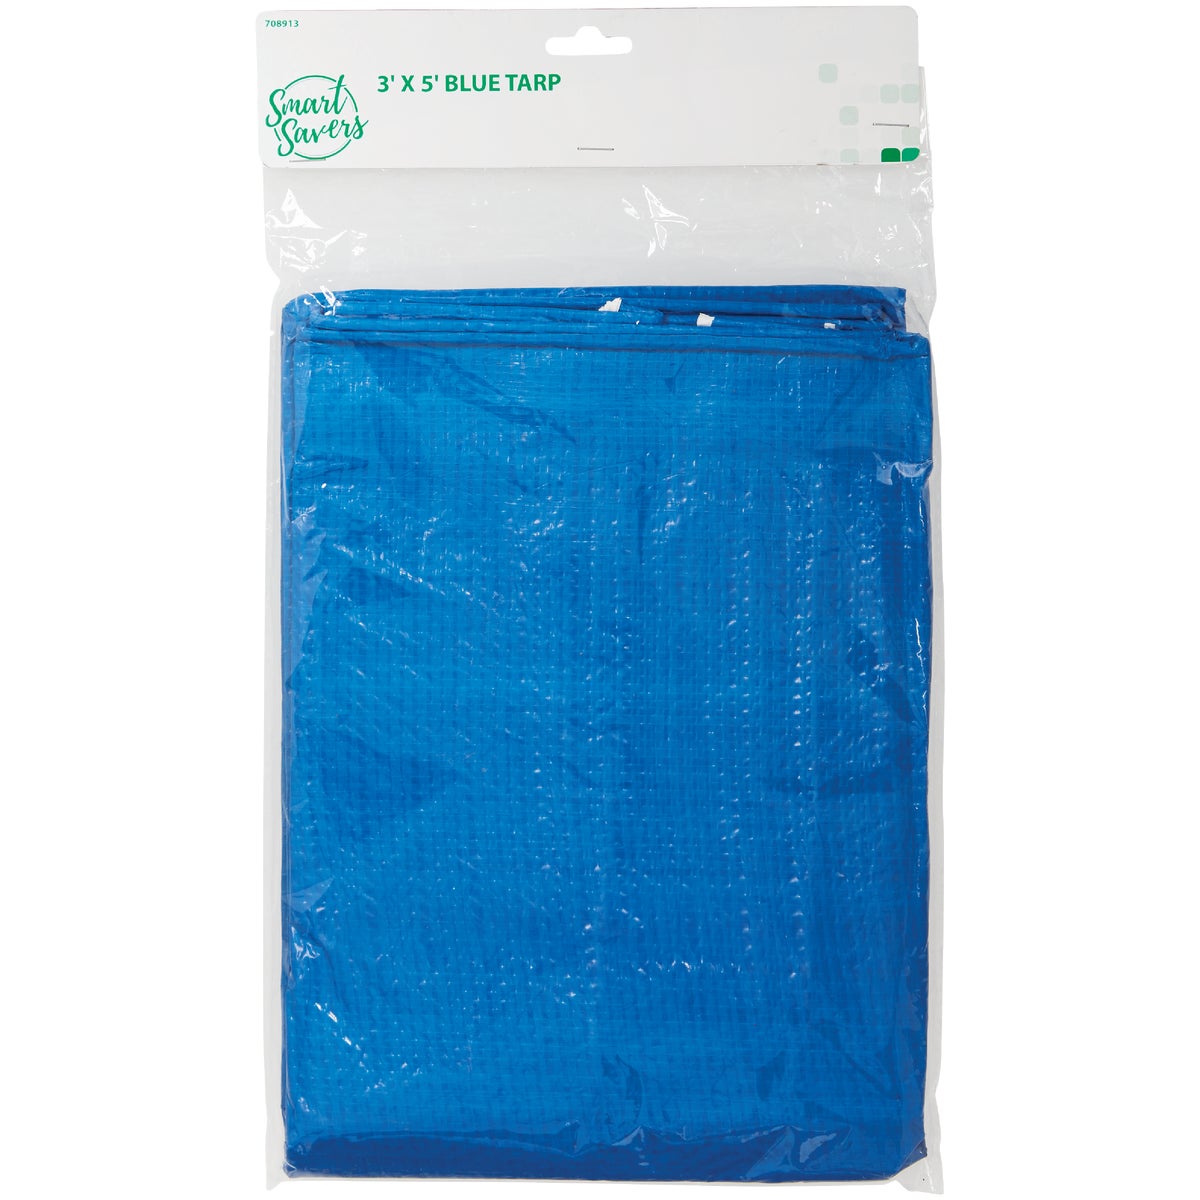 Item 708913, Smart Savers blue tarp. Ideal for a wide variety of applications.